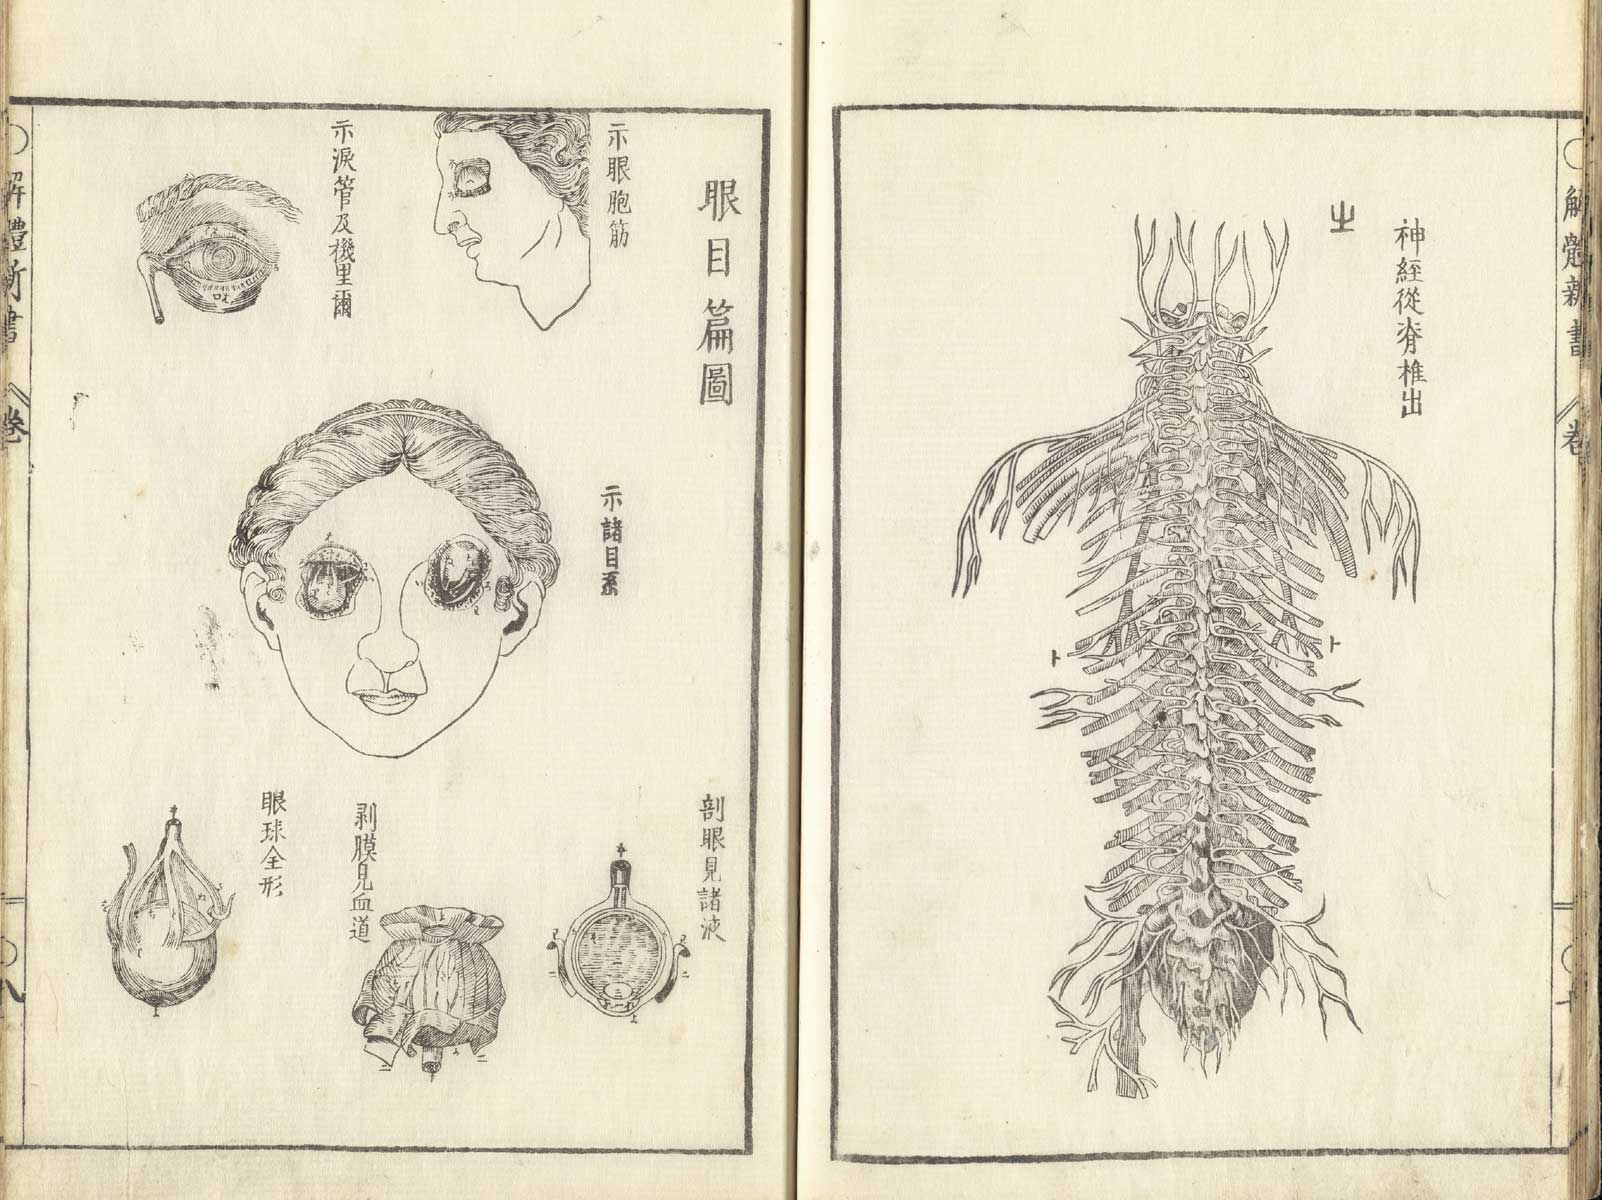 Pages 7 and 8 of Johann Adam Kulmus' Kaitai shinsho. Page 7 is an illustration depicting the network of arteries of the thorax. Page 8 are illustrations of the muscles of the eye.